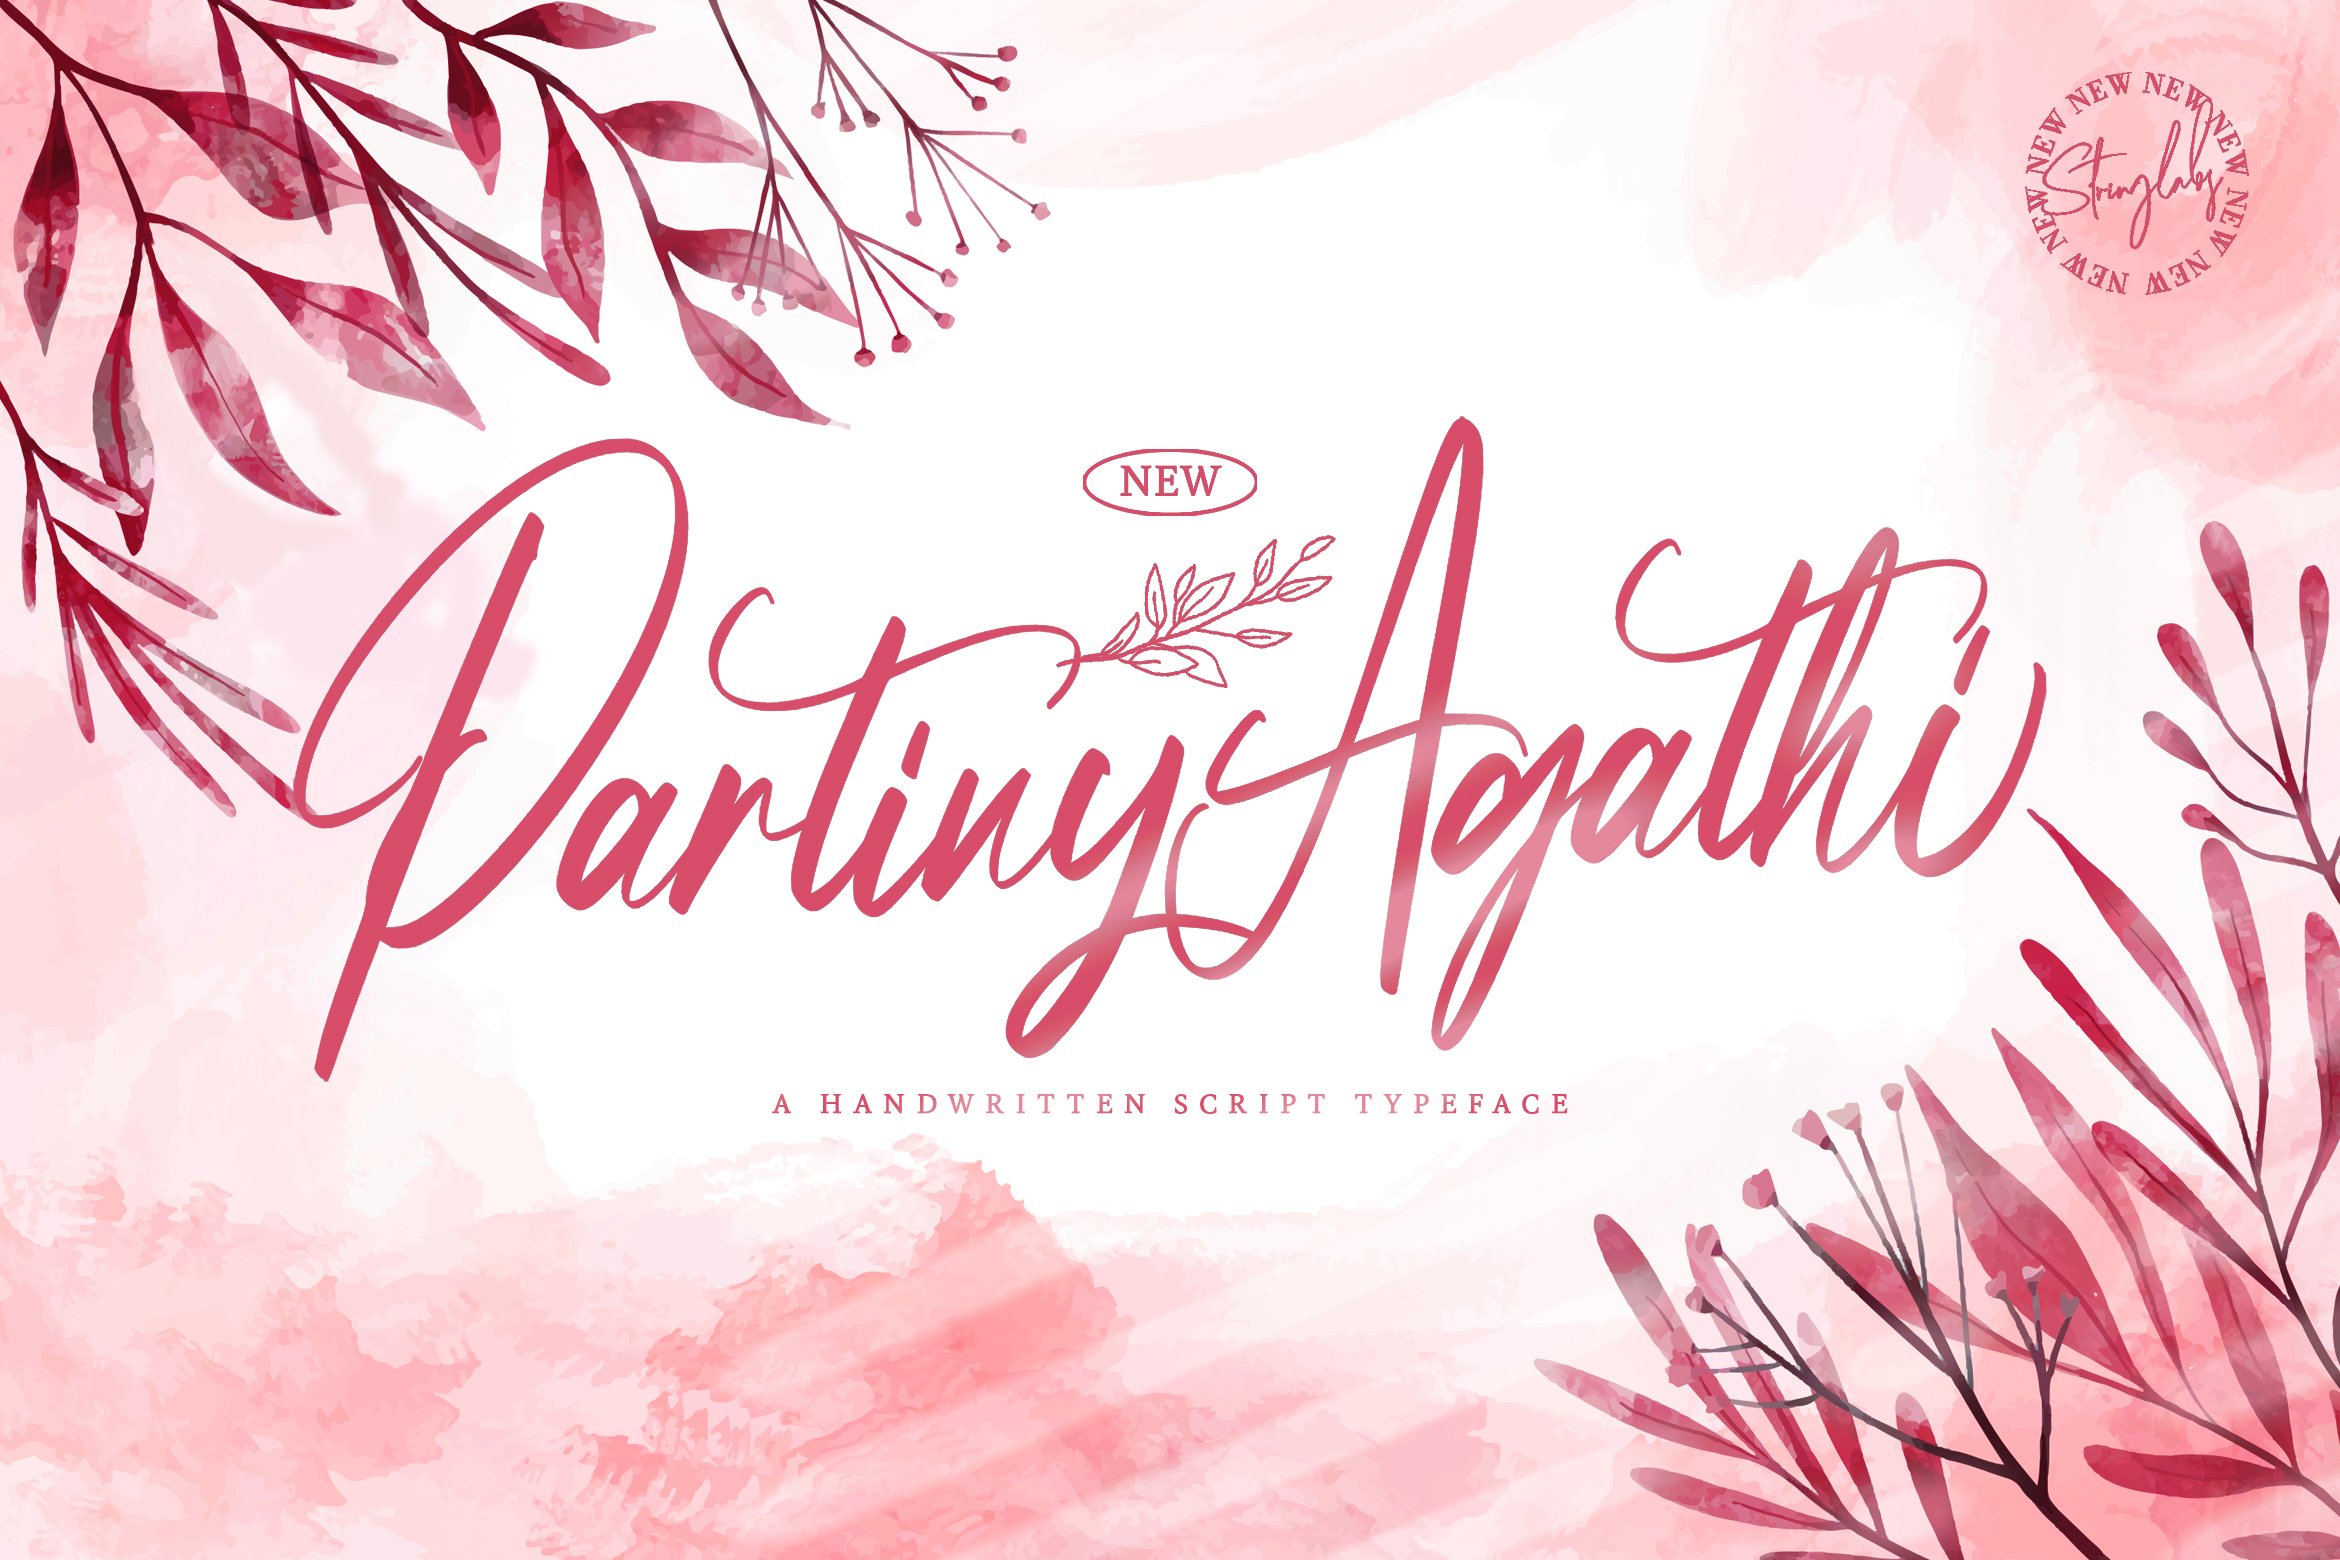 Partiny Agathi - Handwritten Font cover image.